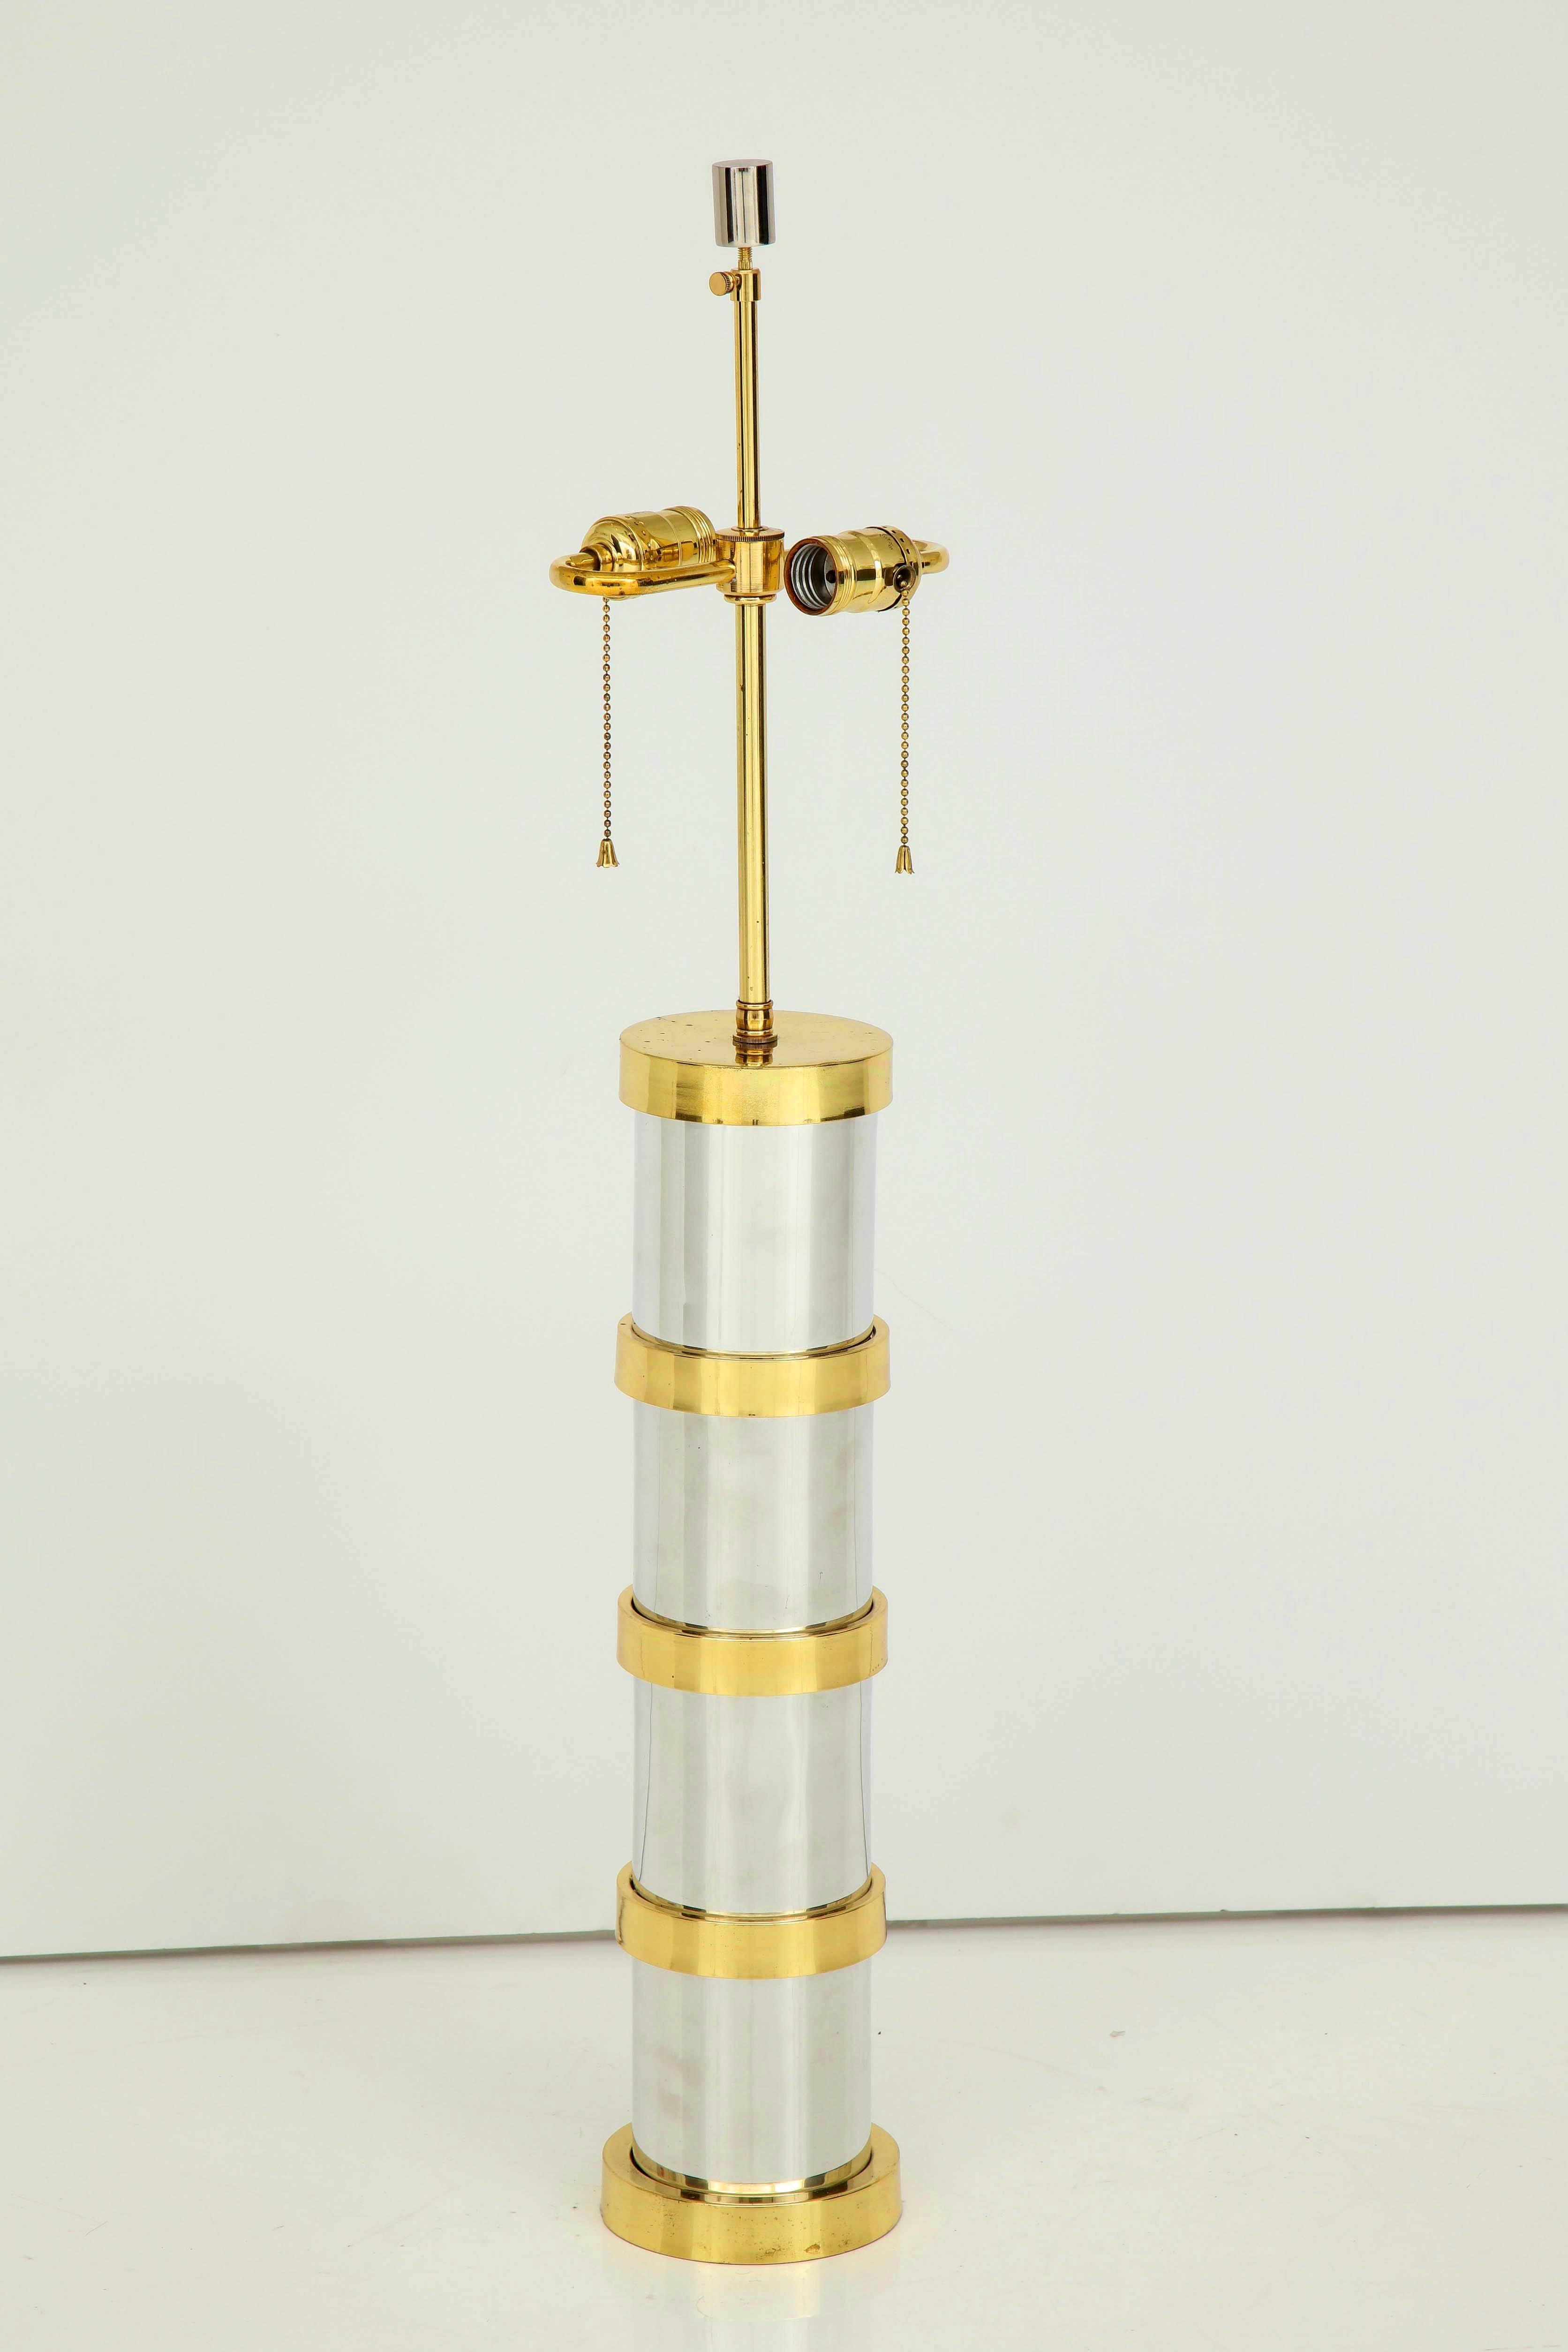 Beautiful brass and chrome round table lamp with alternating bands of brass and chrome. Perfect period statement piece for desk, console or foyer table. Unsigned. 